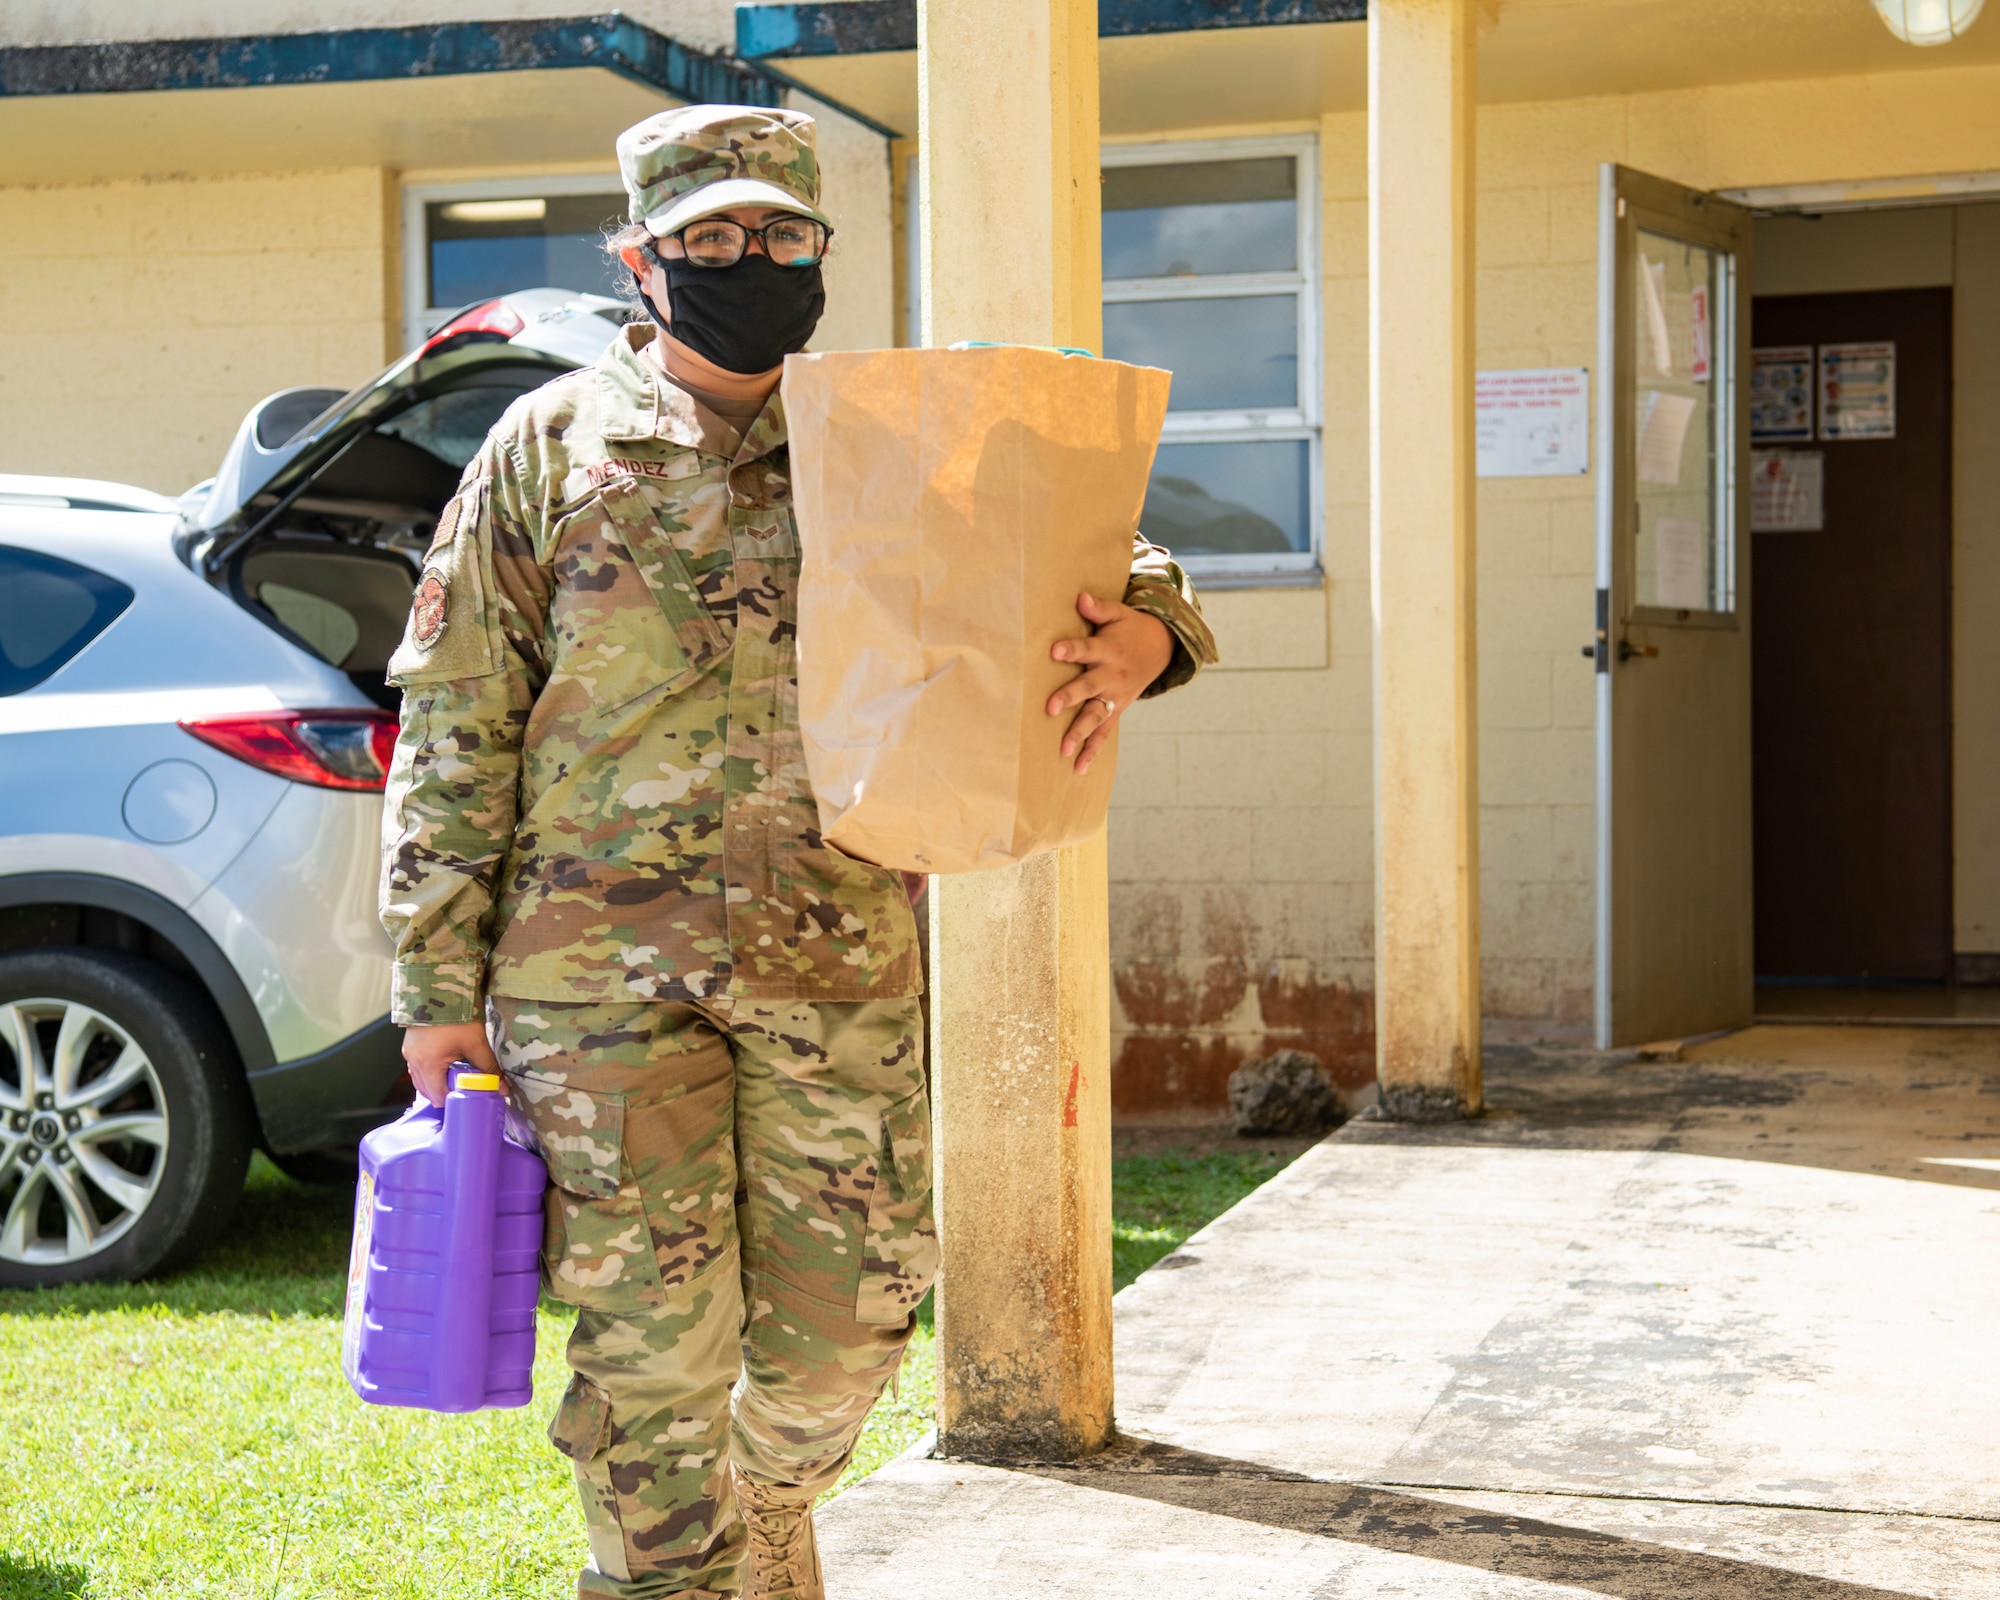 U.S. Air Force Senior Airman Monica Mendez, Air Force Sergeants Association Chapter 1560 member, carries donation items at The Salvation Army Guam Corps headquarters in Barrigada, Guam, April 8, 2021. Members from Andersen Air Force Base’s AFSA garnered more than 1,800 items through donation drives during the month of March, which totaled to $10,000 in assistance for The Salvation Army. (U.S. Air Force photo by Senior Airman Aubree Owens)